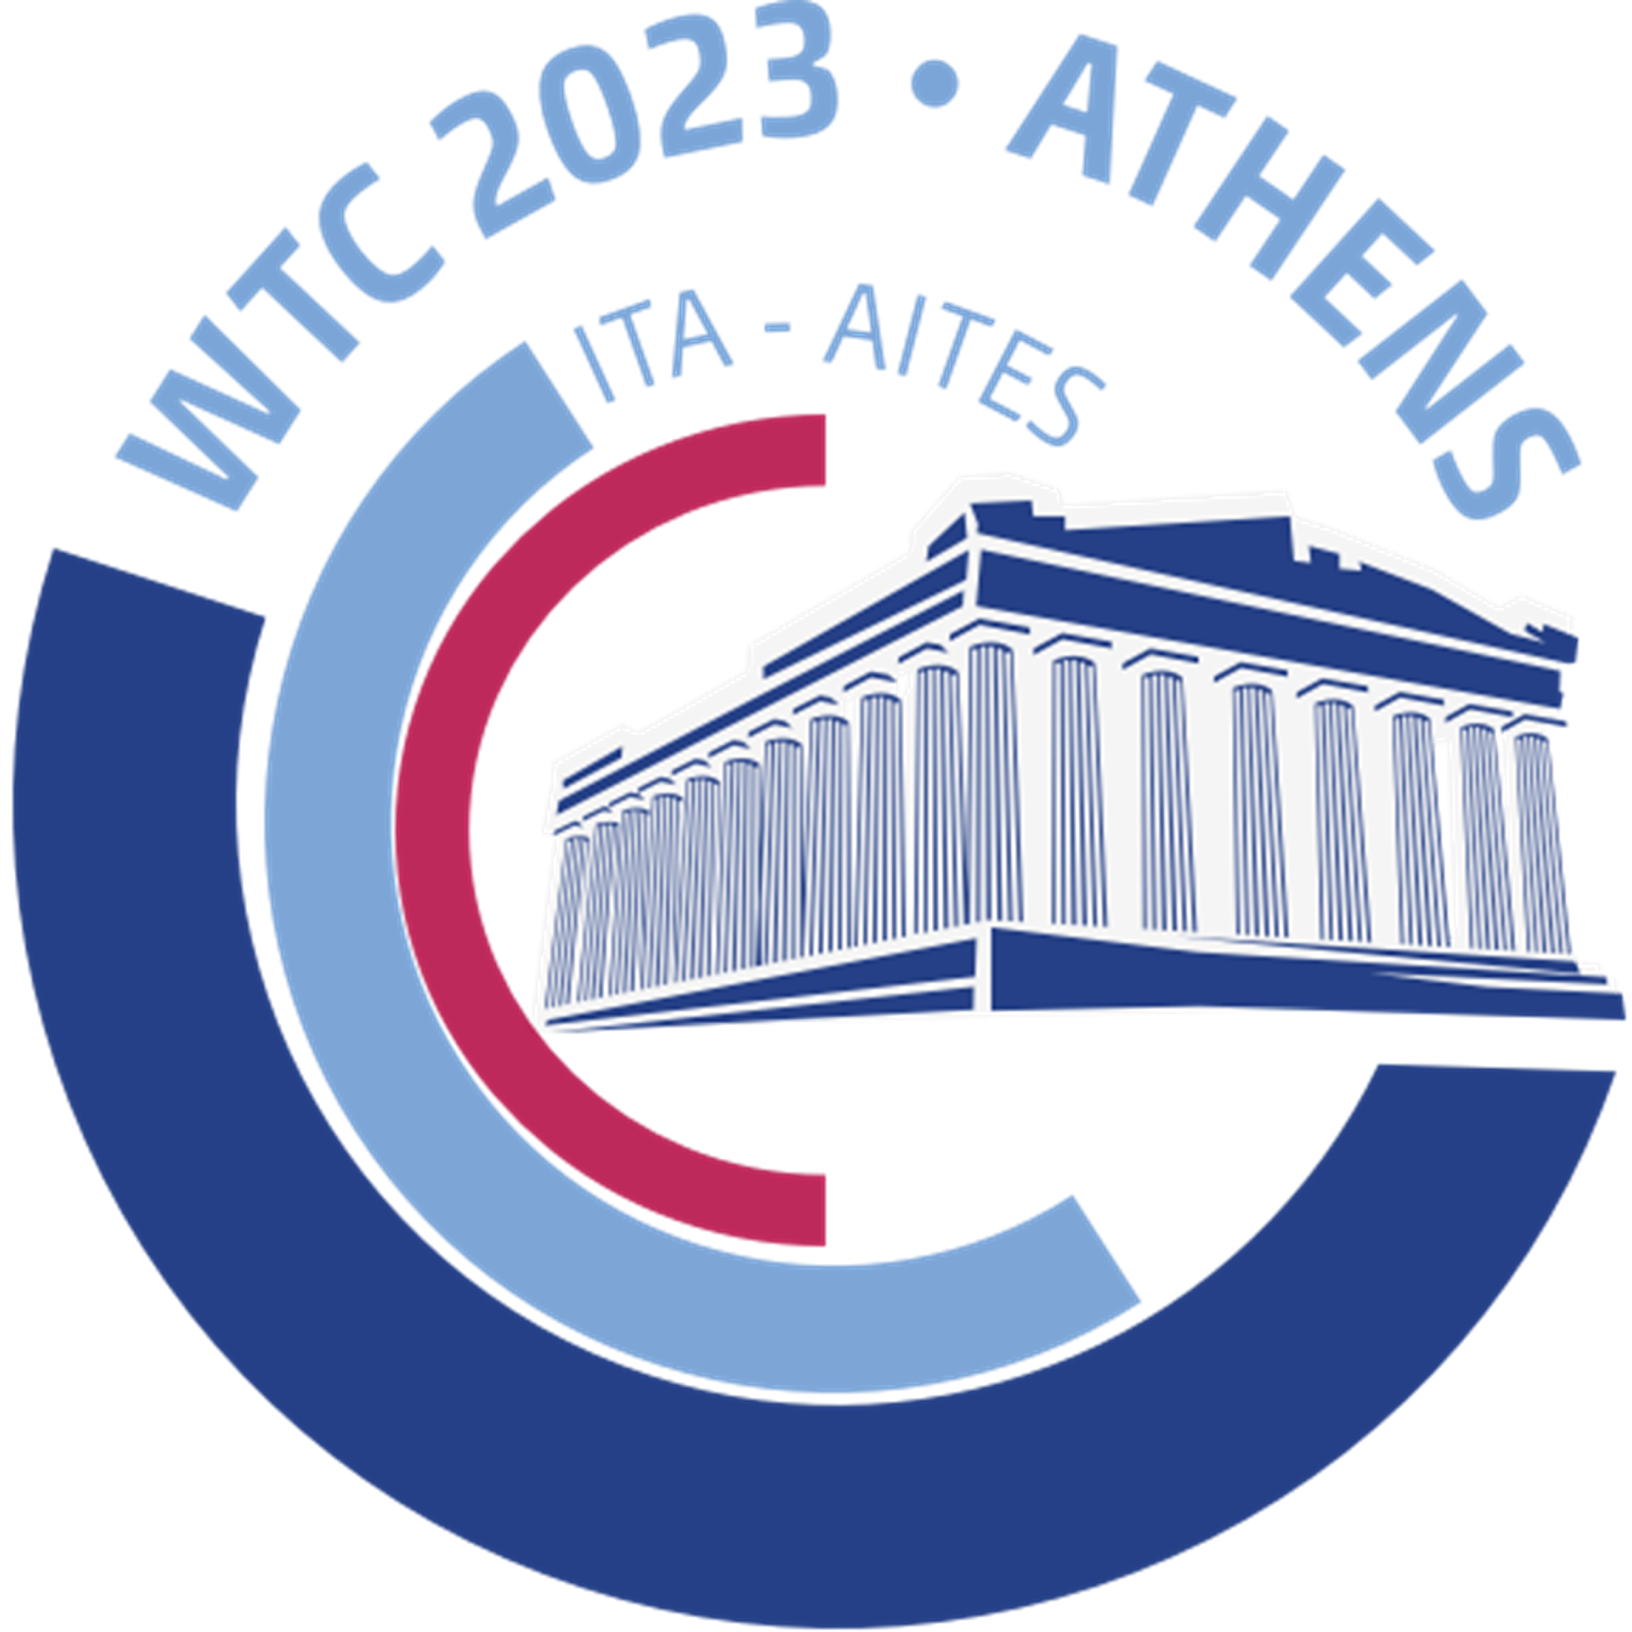 A logo featuring stylized graphic of the Parthenon and some text